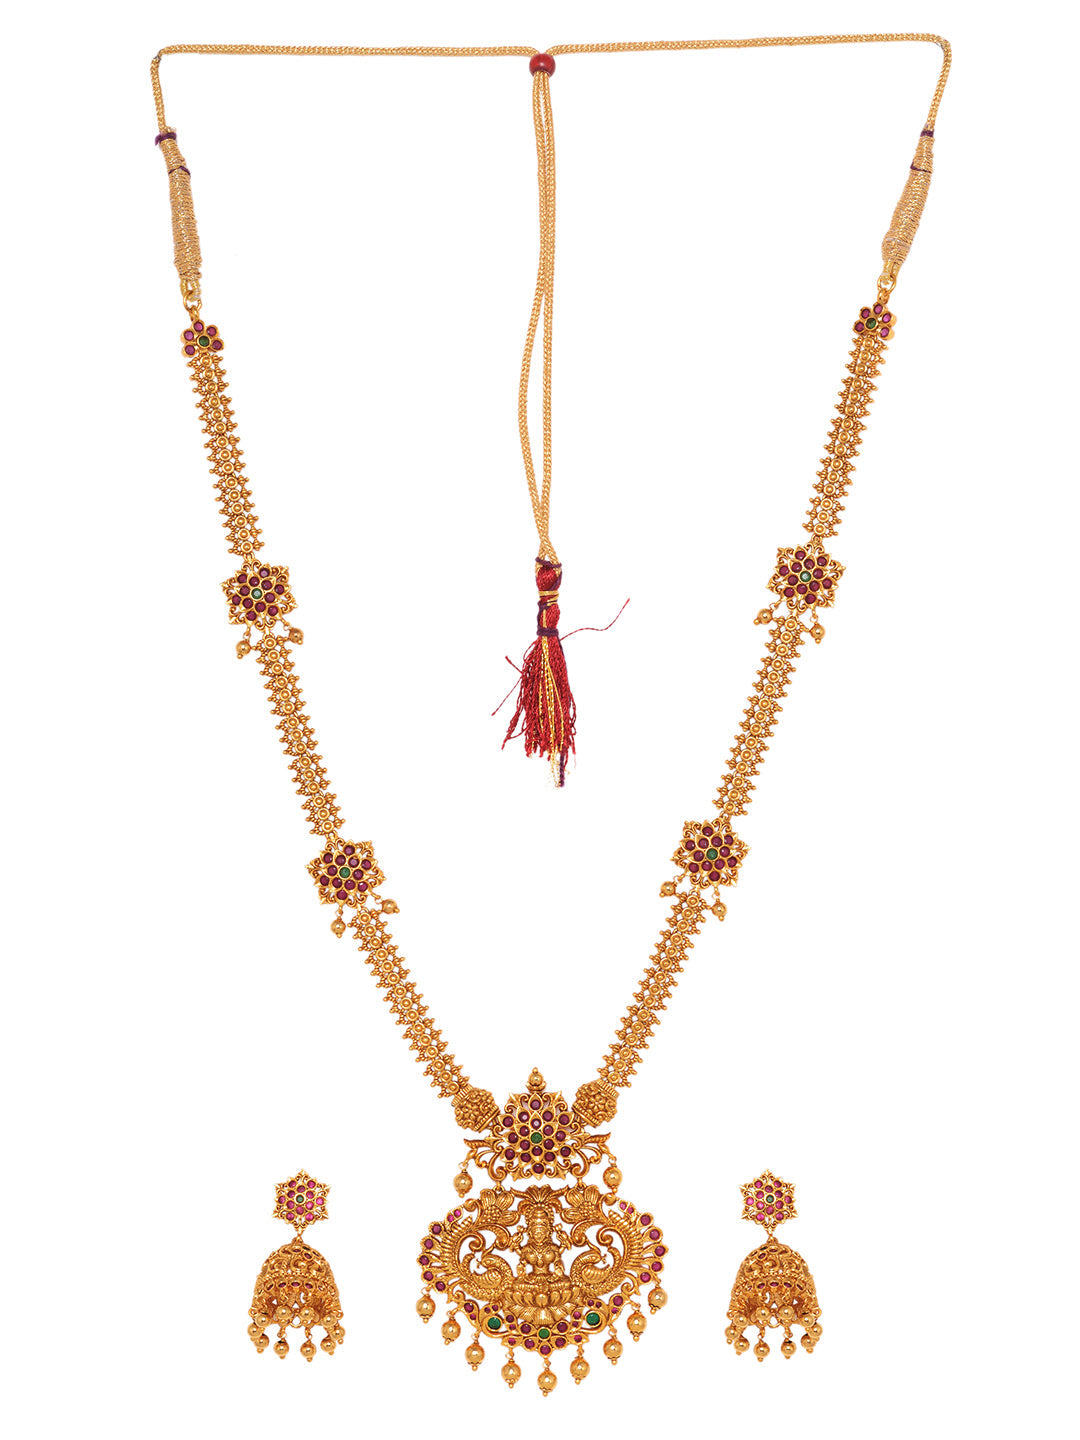 Buy Yuvaa Galleria Jewellery Set, Gold Colored Matte Finish Brass Lakshmi  Model Haram, Necklace With Ear Rings For Women And Girls at Amazon.in